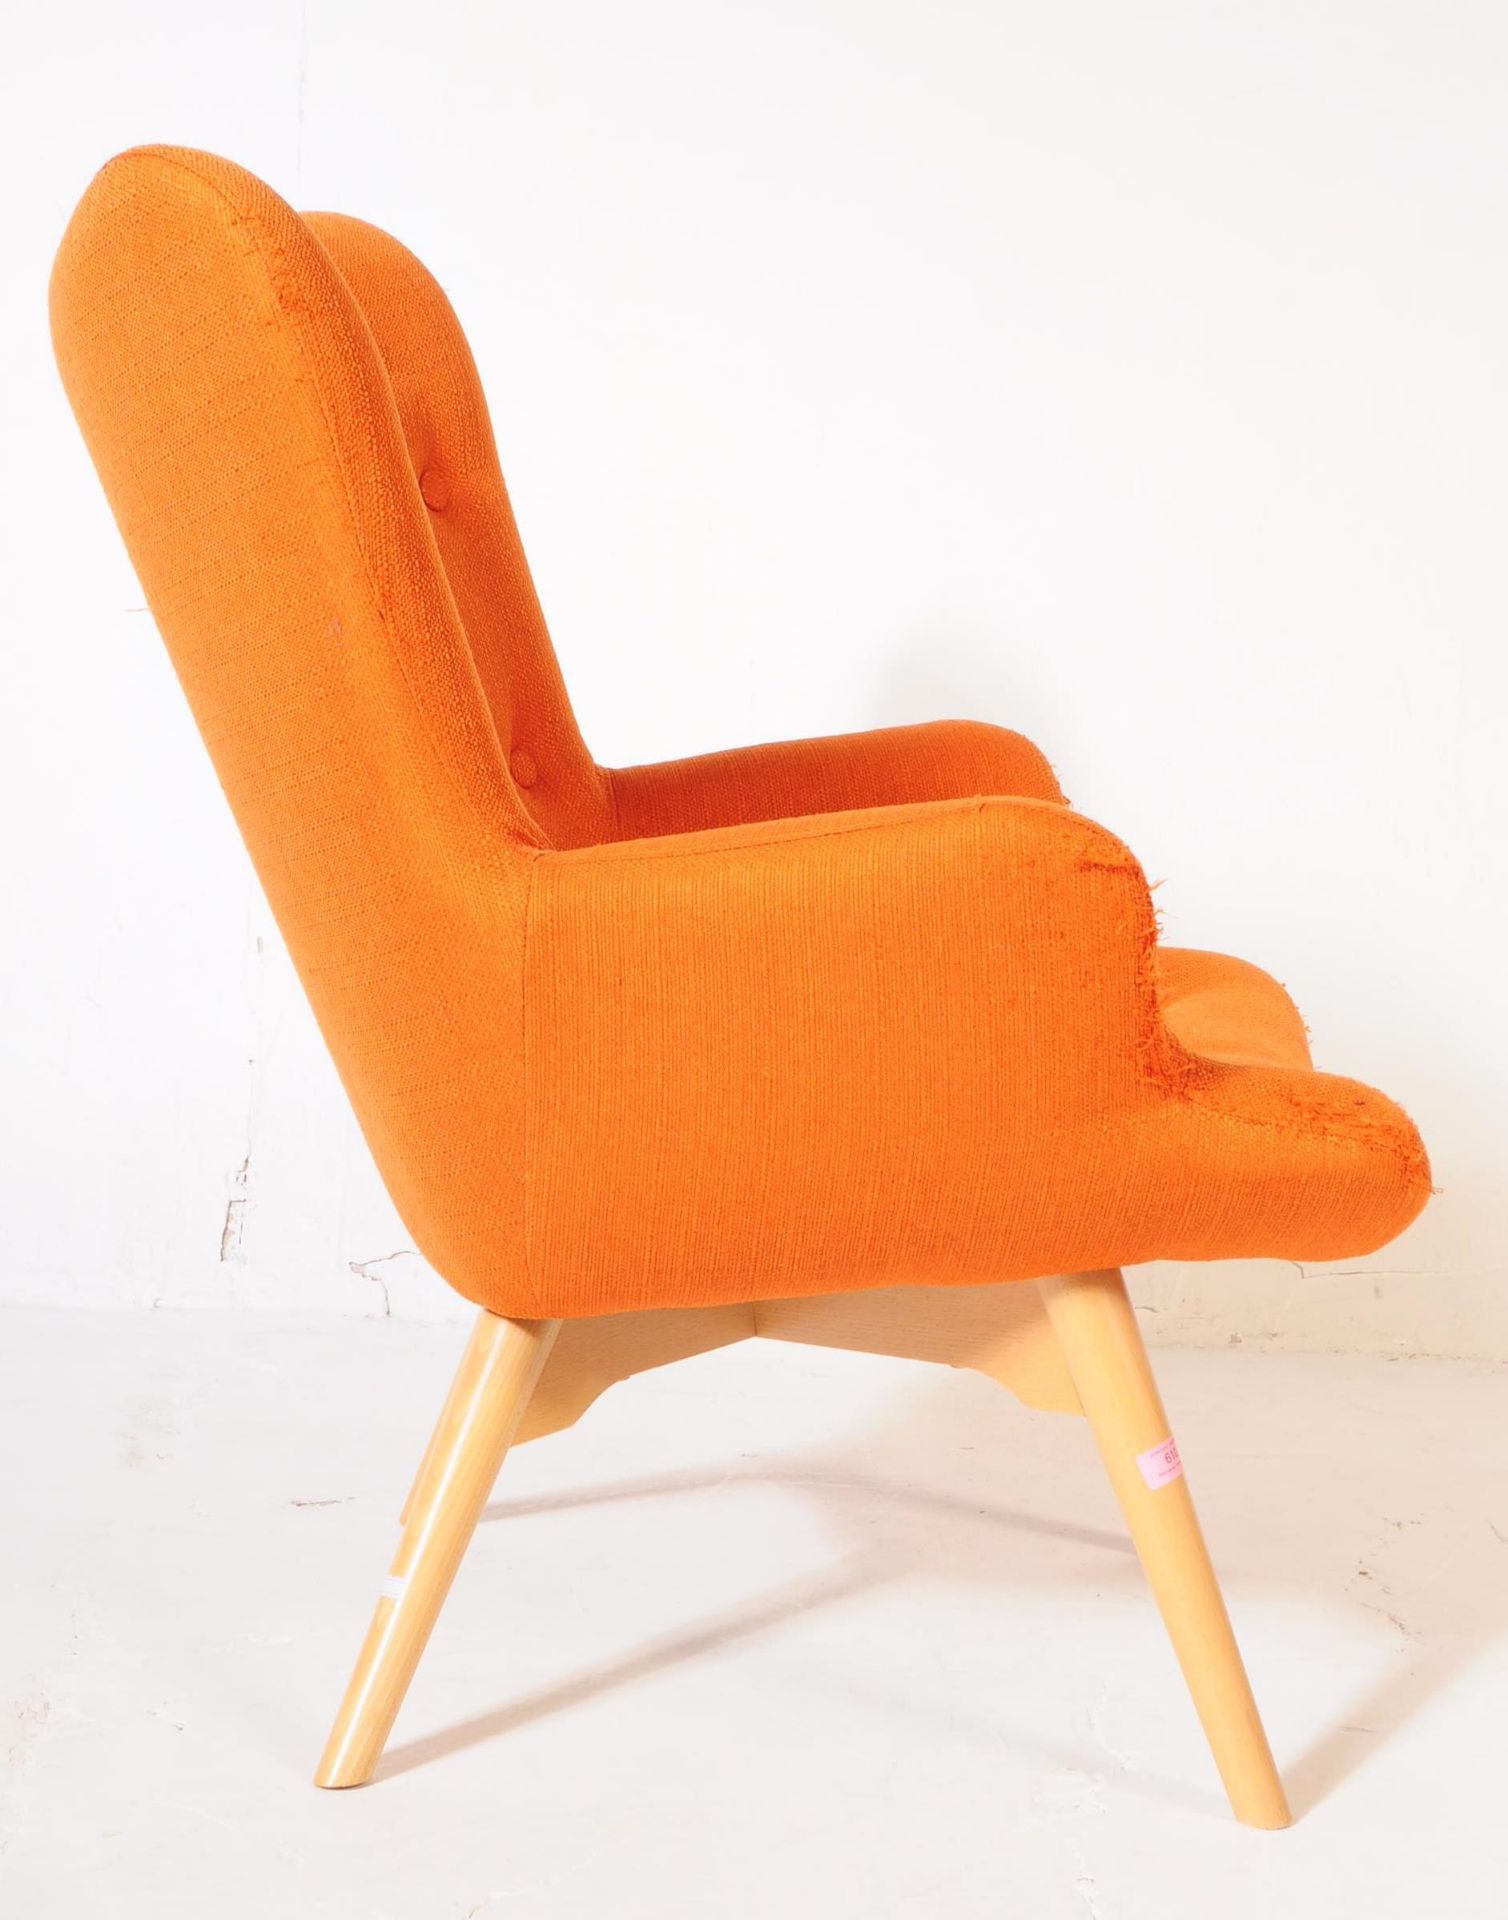 ERCOL MANNER - MID CENTURY ORANGE WINGBACK ARMCHAIR - Image 3 of 4